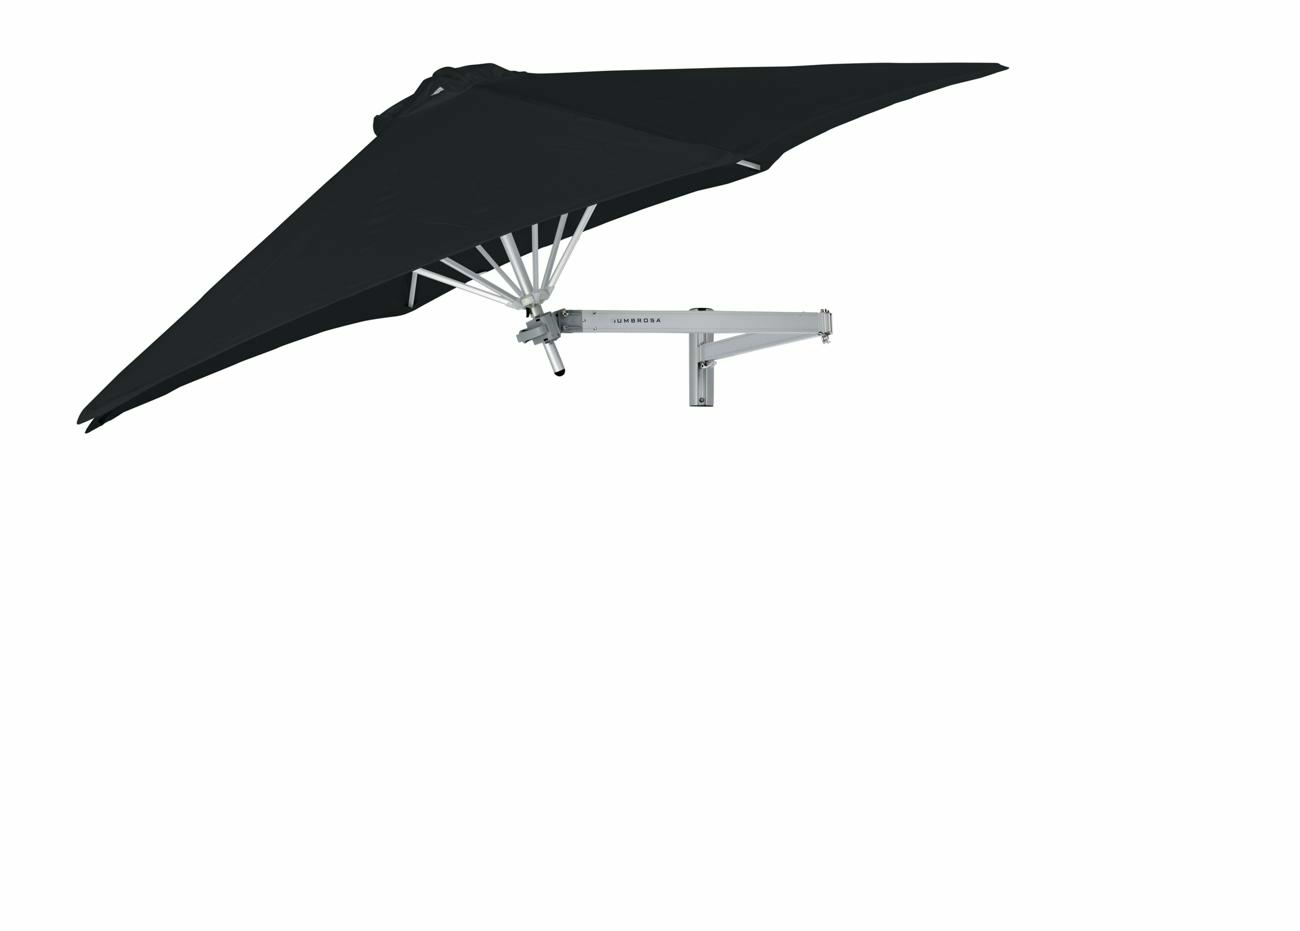 Paraflex wall mounted parasols round 2,7 m with Black fabric and a Classic arm